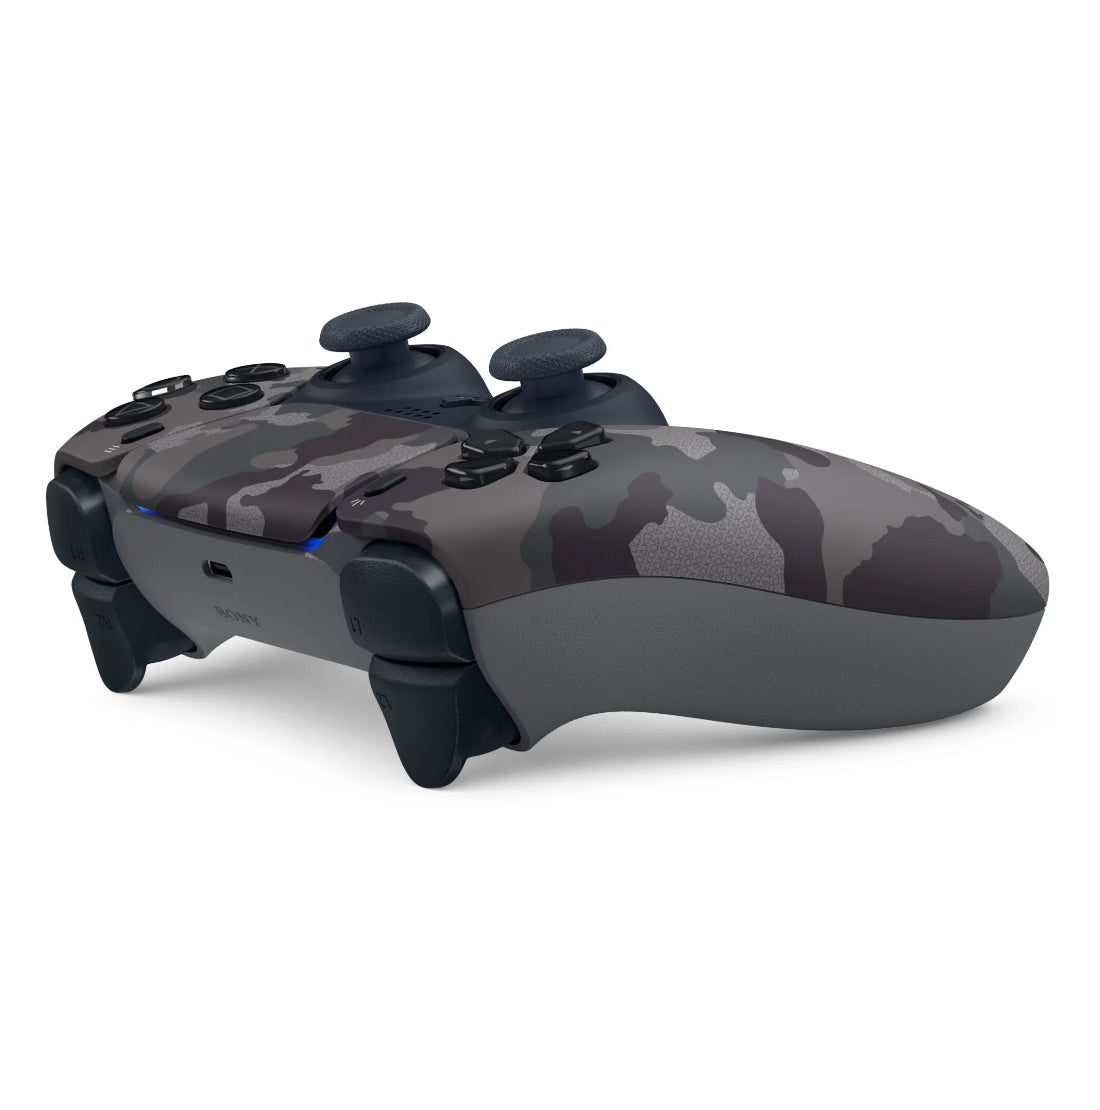 Sony Playstation 5 Disc Edition Bundle with Extra Gray Camo Controller, Black PULSE 3D Wireless Headset and Play and Charge Kit - Pro-Distributing